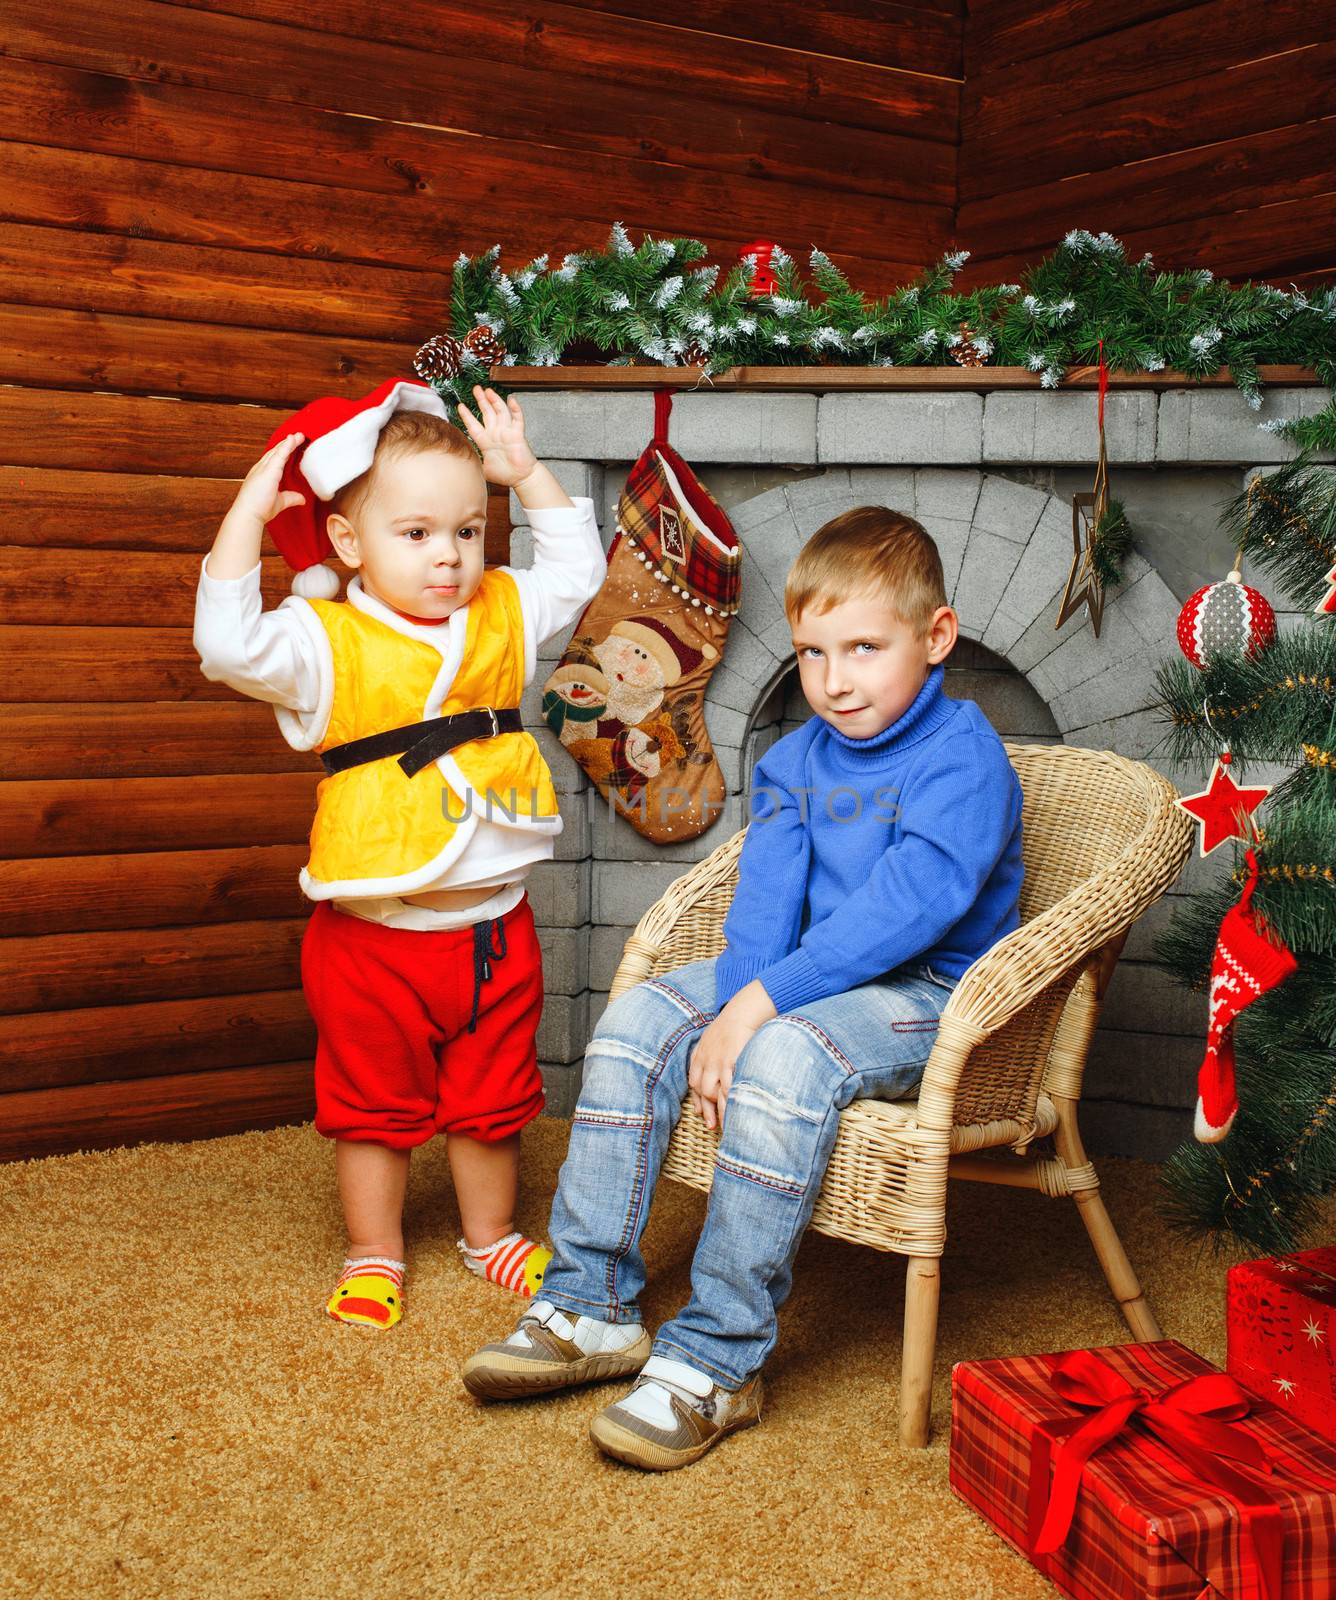 Two brothers near decorated Christmas tree pending holiday